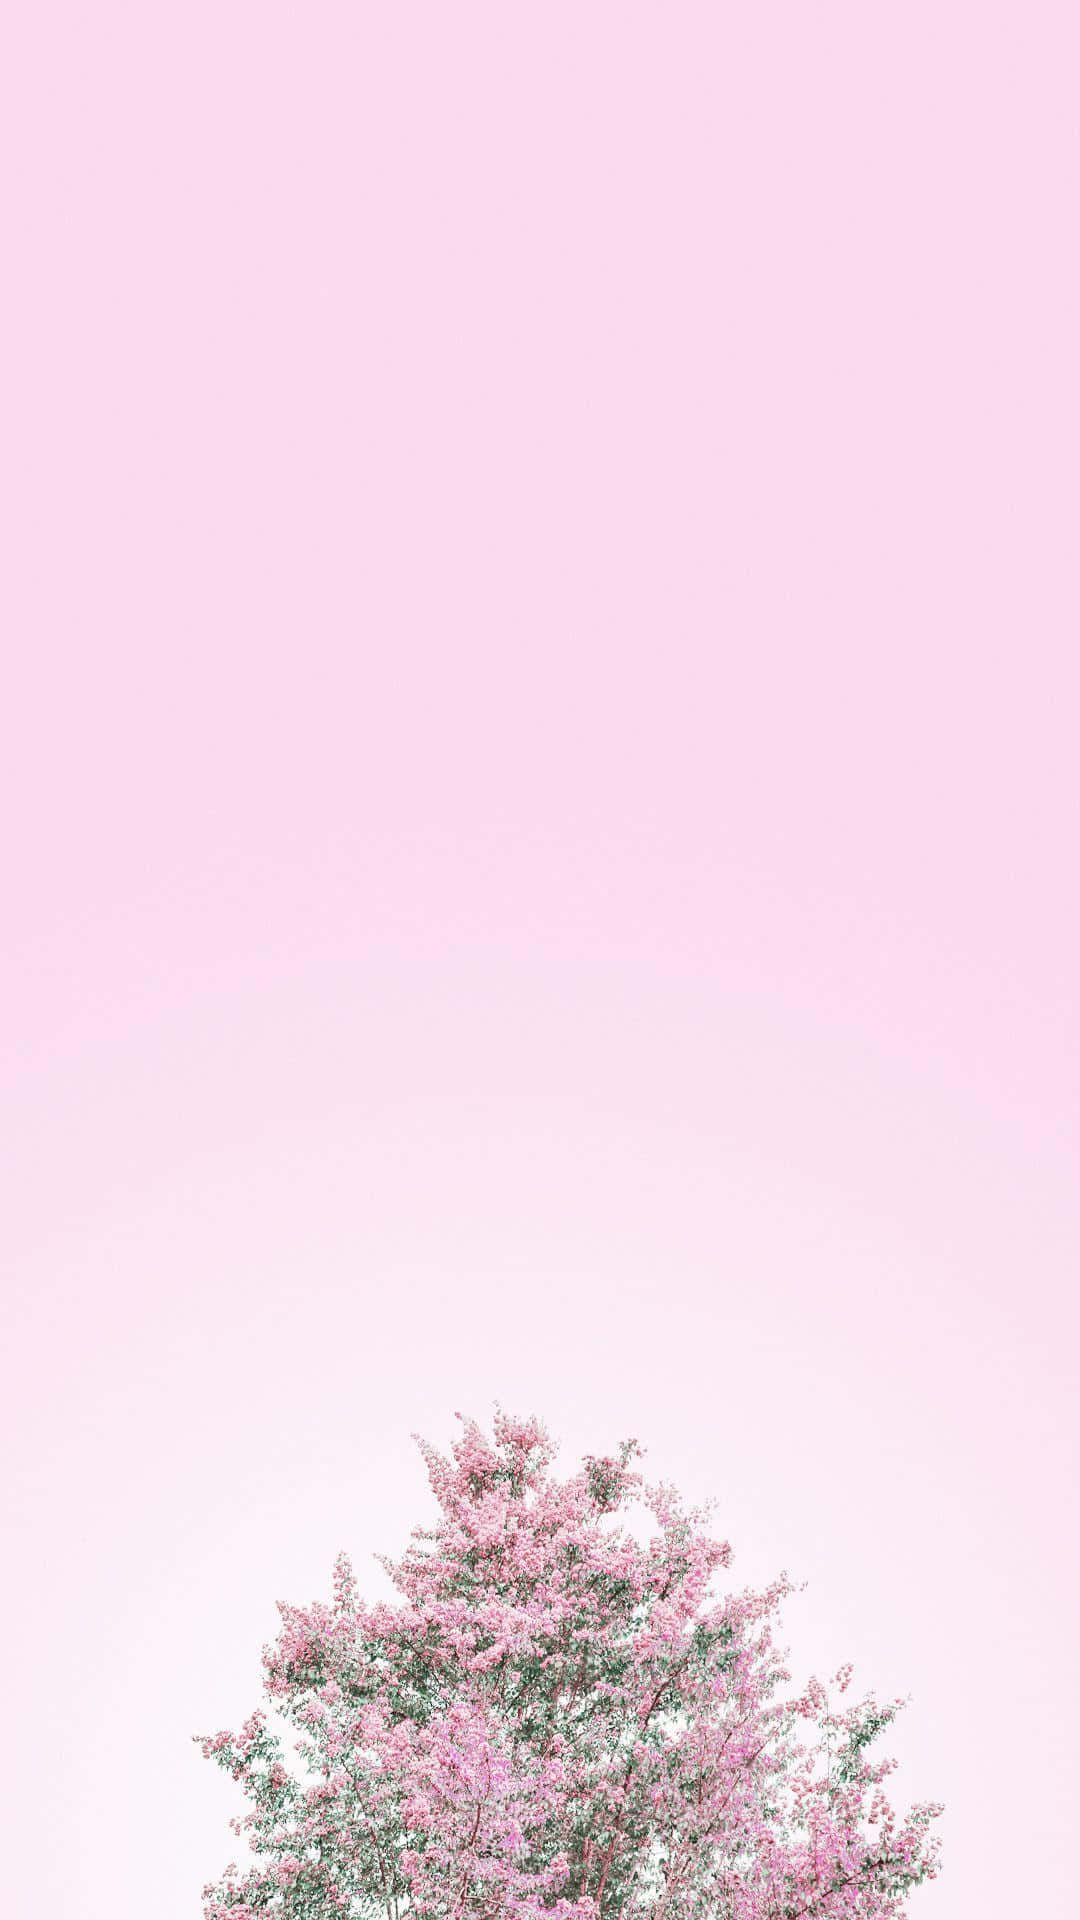 A beautiful wallpaper of pink and white colors Wallpaper